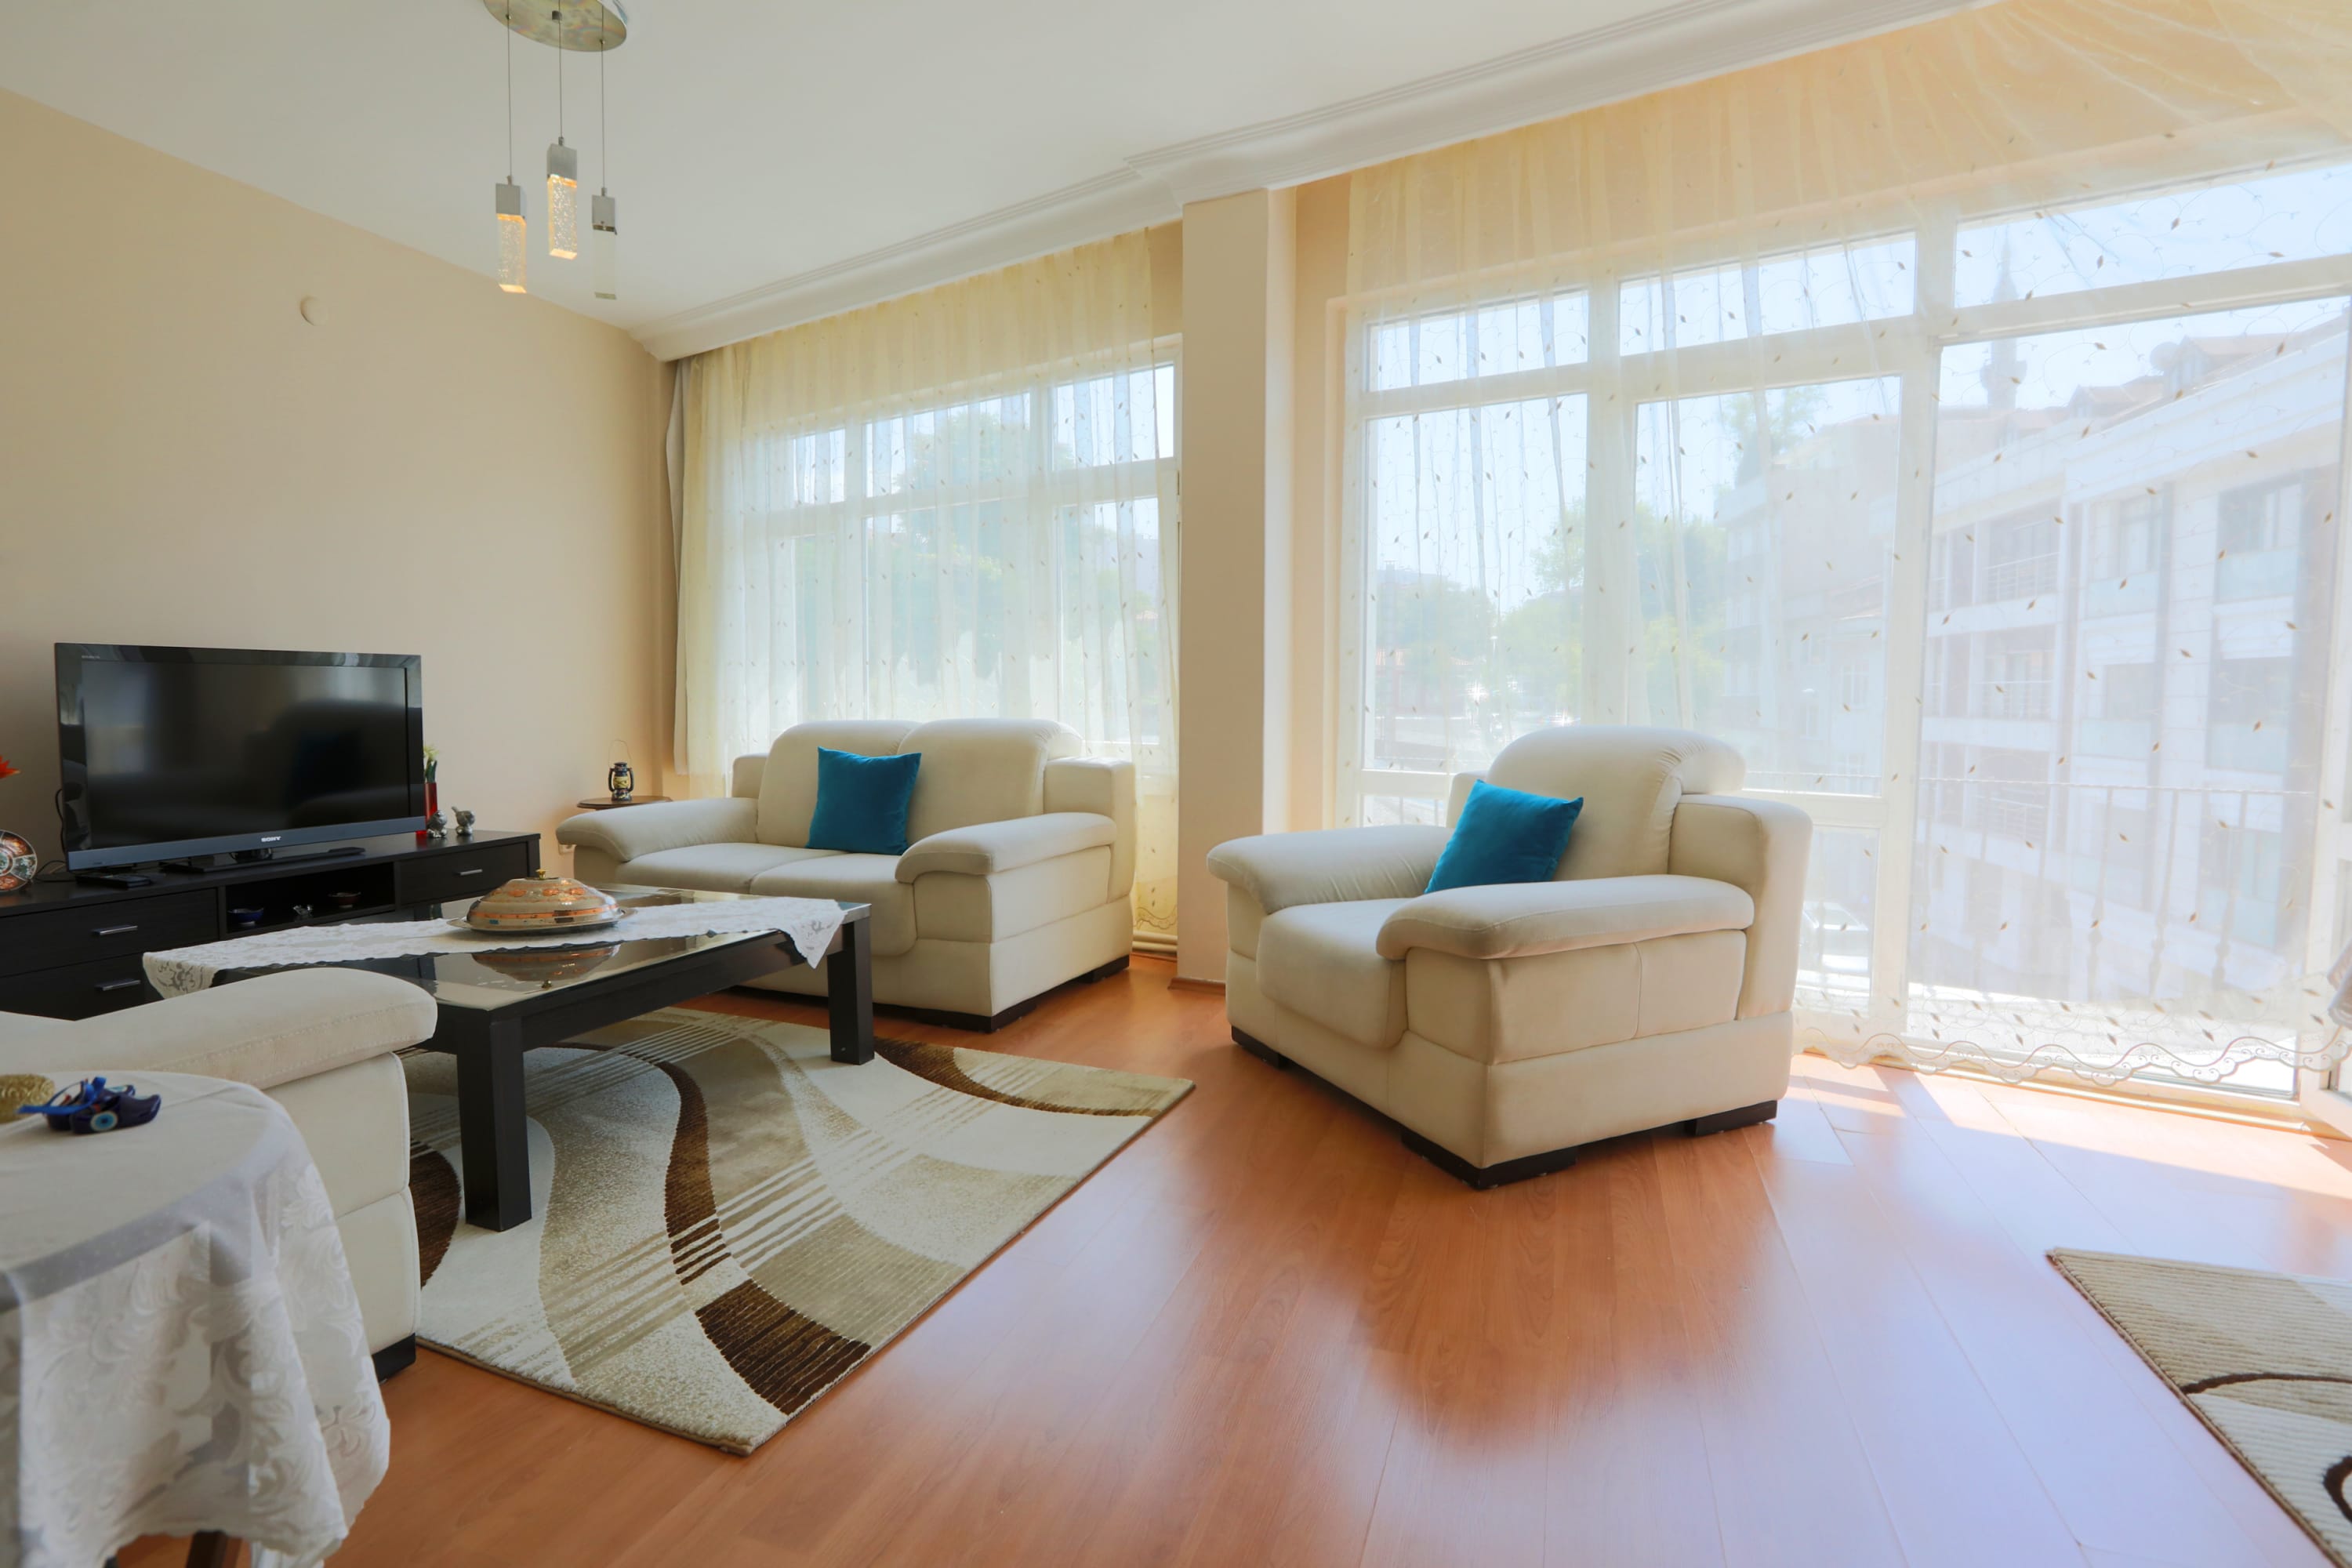 Property Image 1 - Flat with Two Living Rooms and Balcony in Uskudar